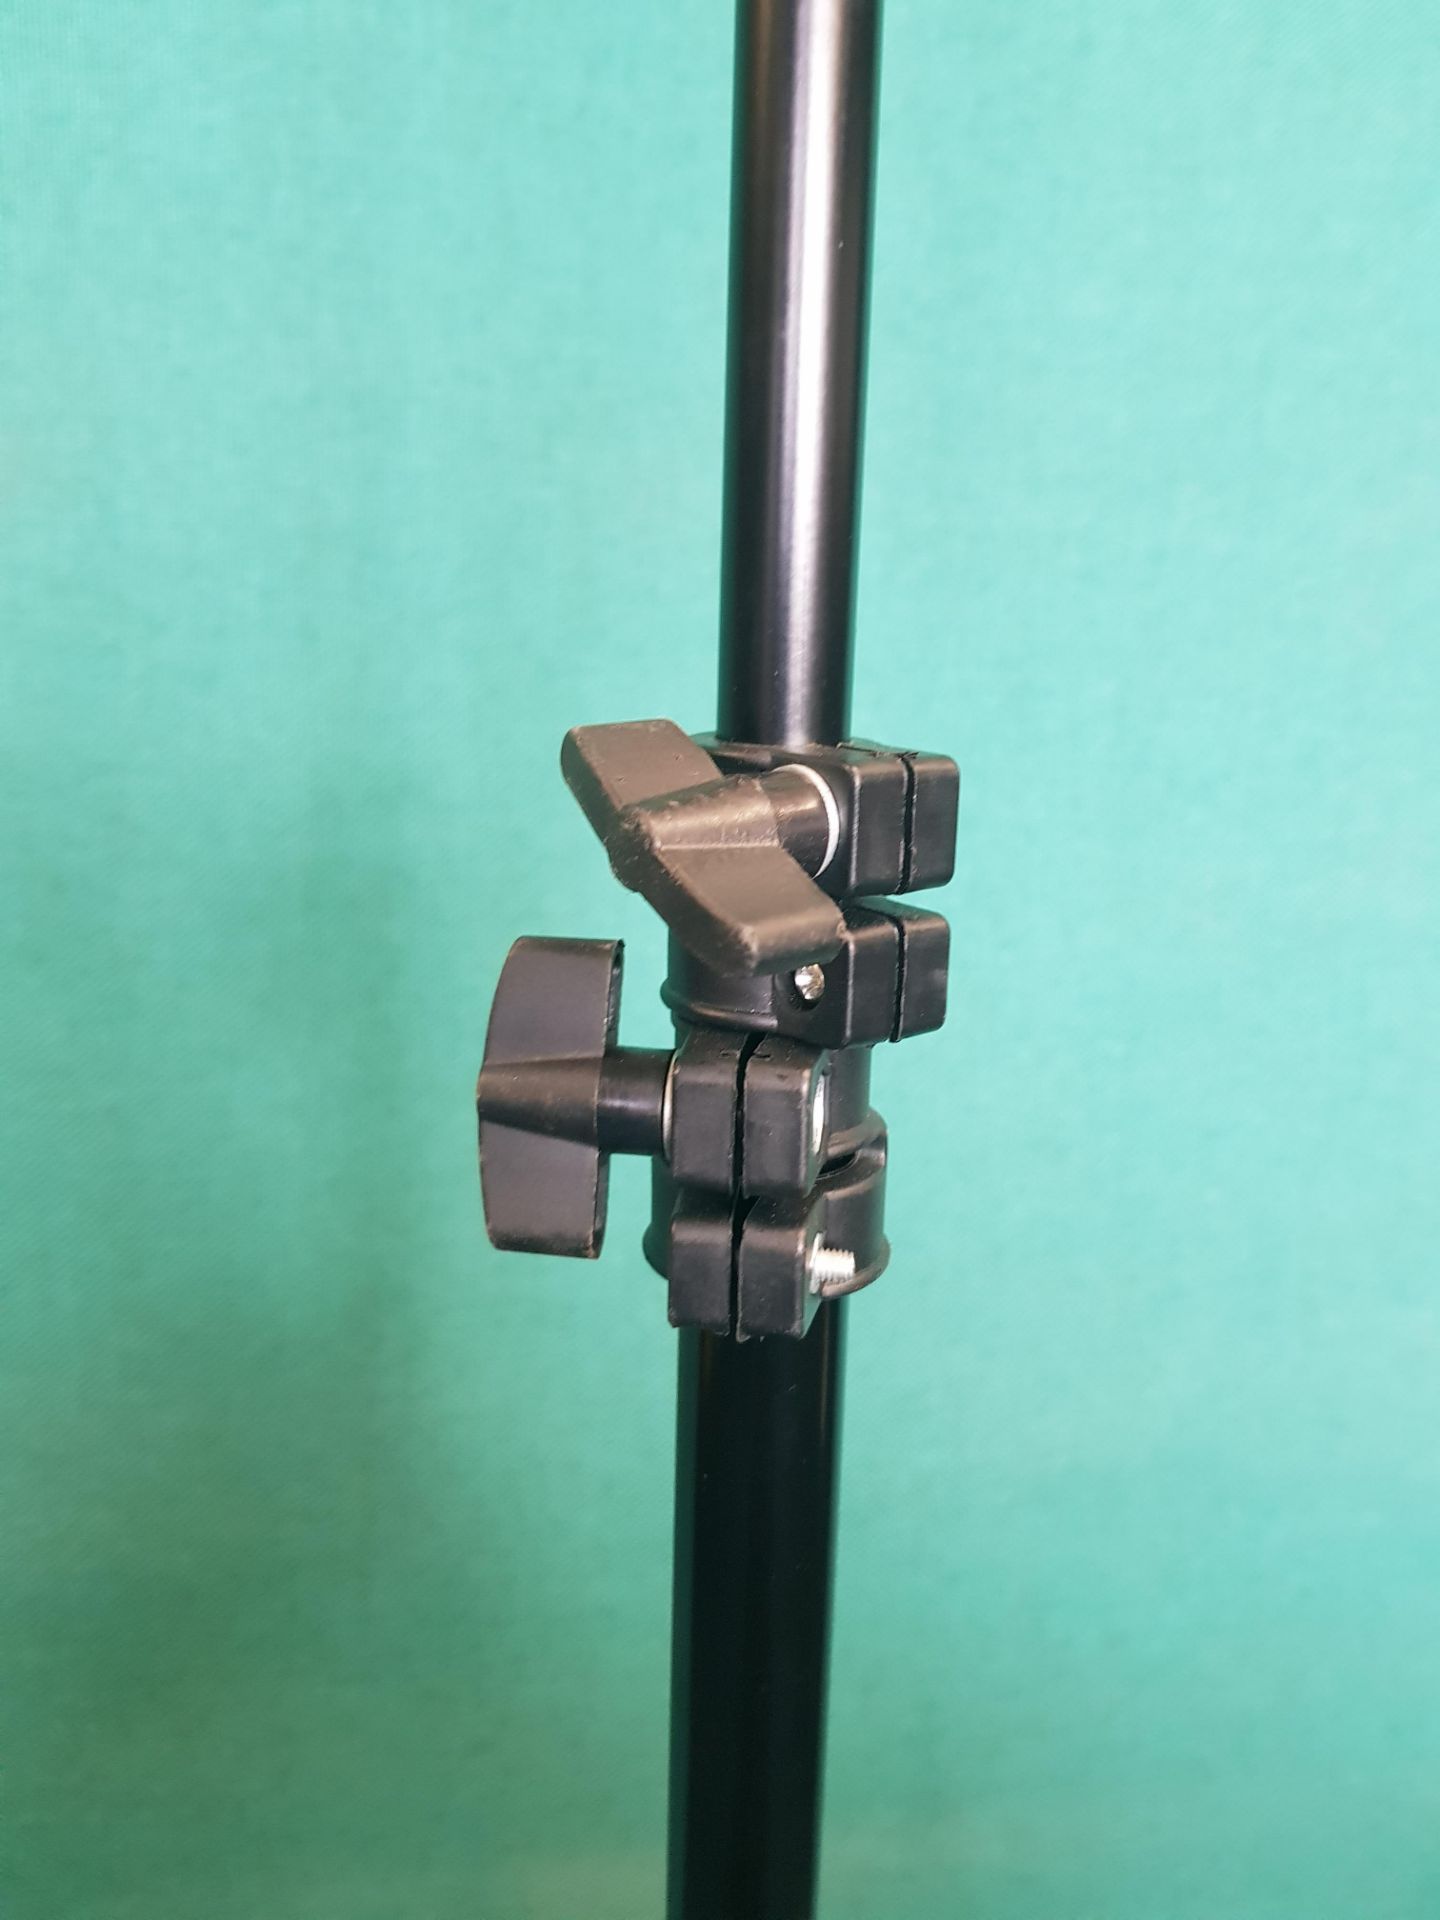 Adjustable Camera Stand - Image 3 of 4